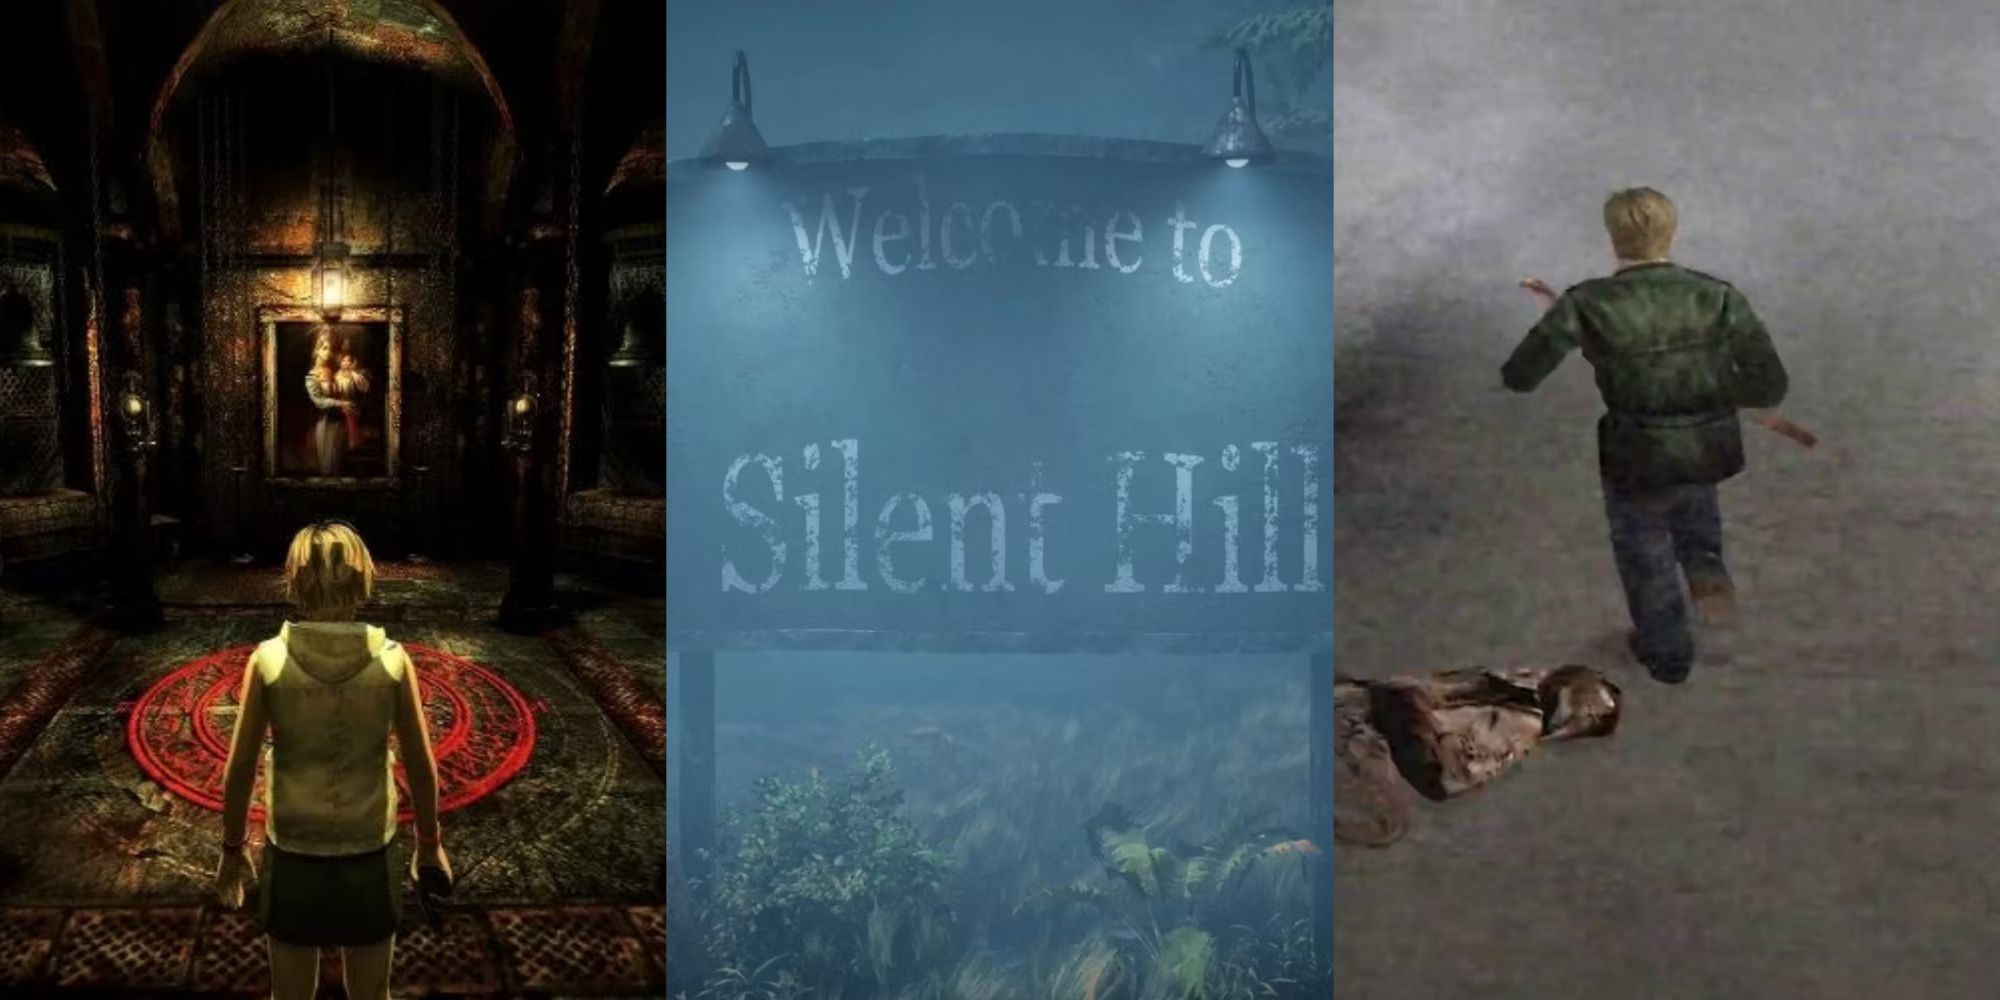 Silent Hill 3 Heather looking at a painting, the 'Welcome to Silent Hill' sign, and James running with a shotgun in Silent Hill 2, left to right